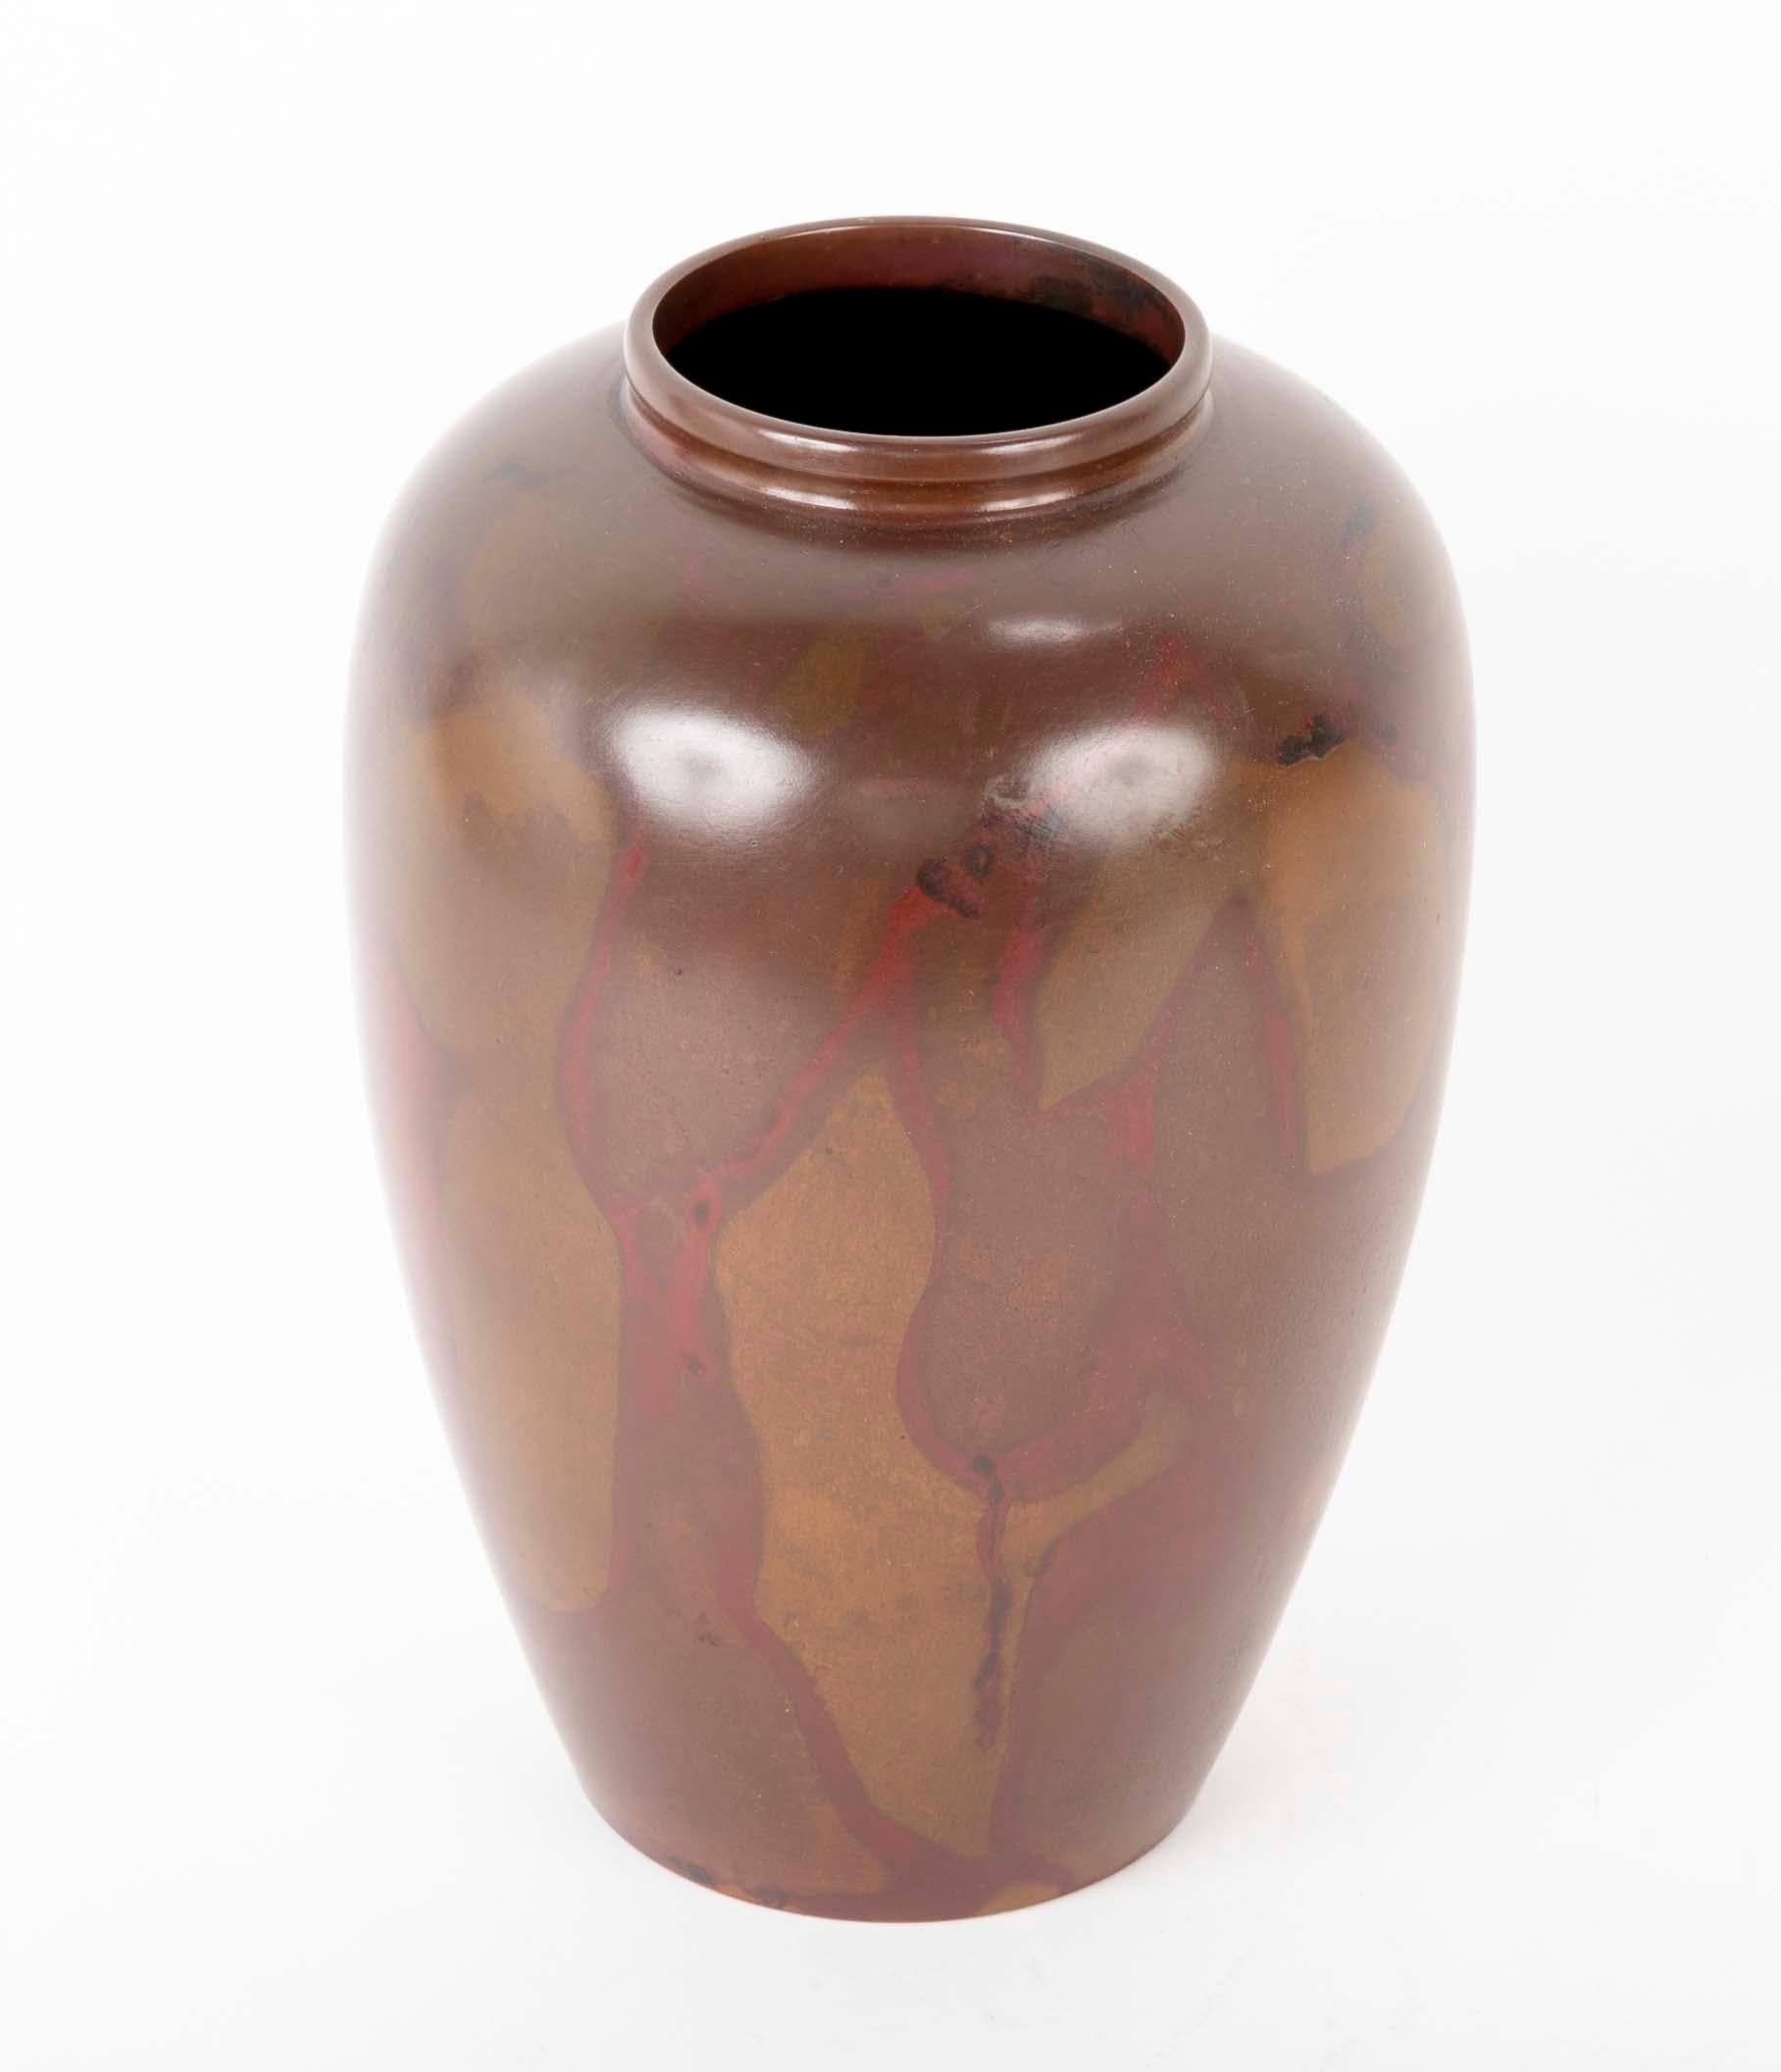 An extremely large Japanese bronze vase from the Showa period. Patinated using a Murashido oil technique to create the slightly marbleized looking red shapes.